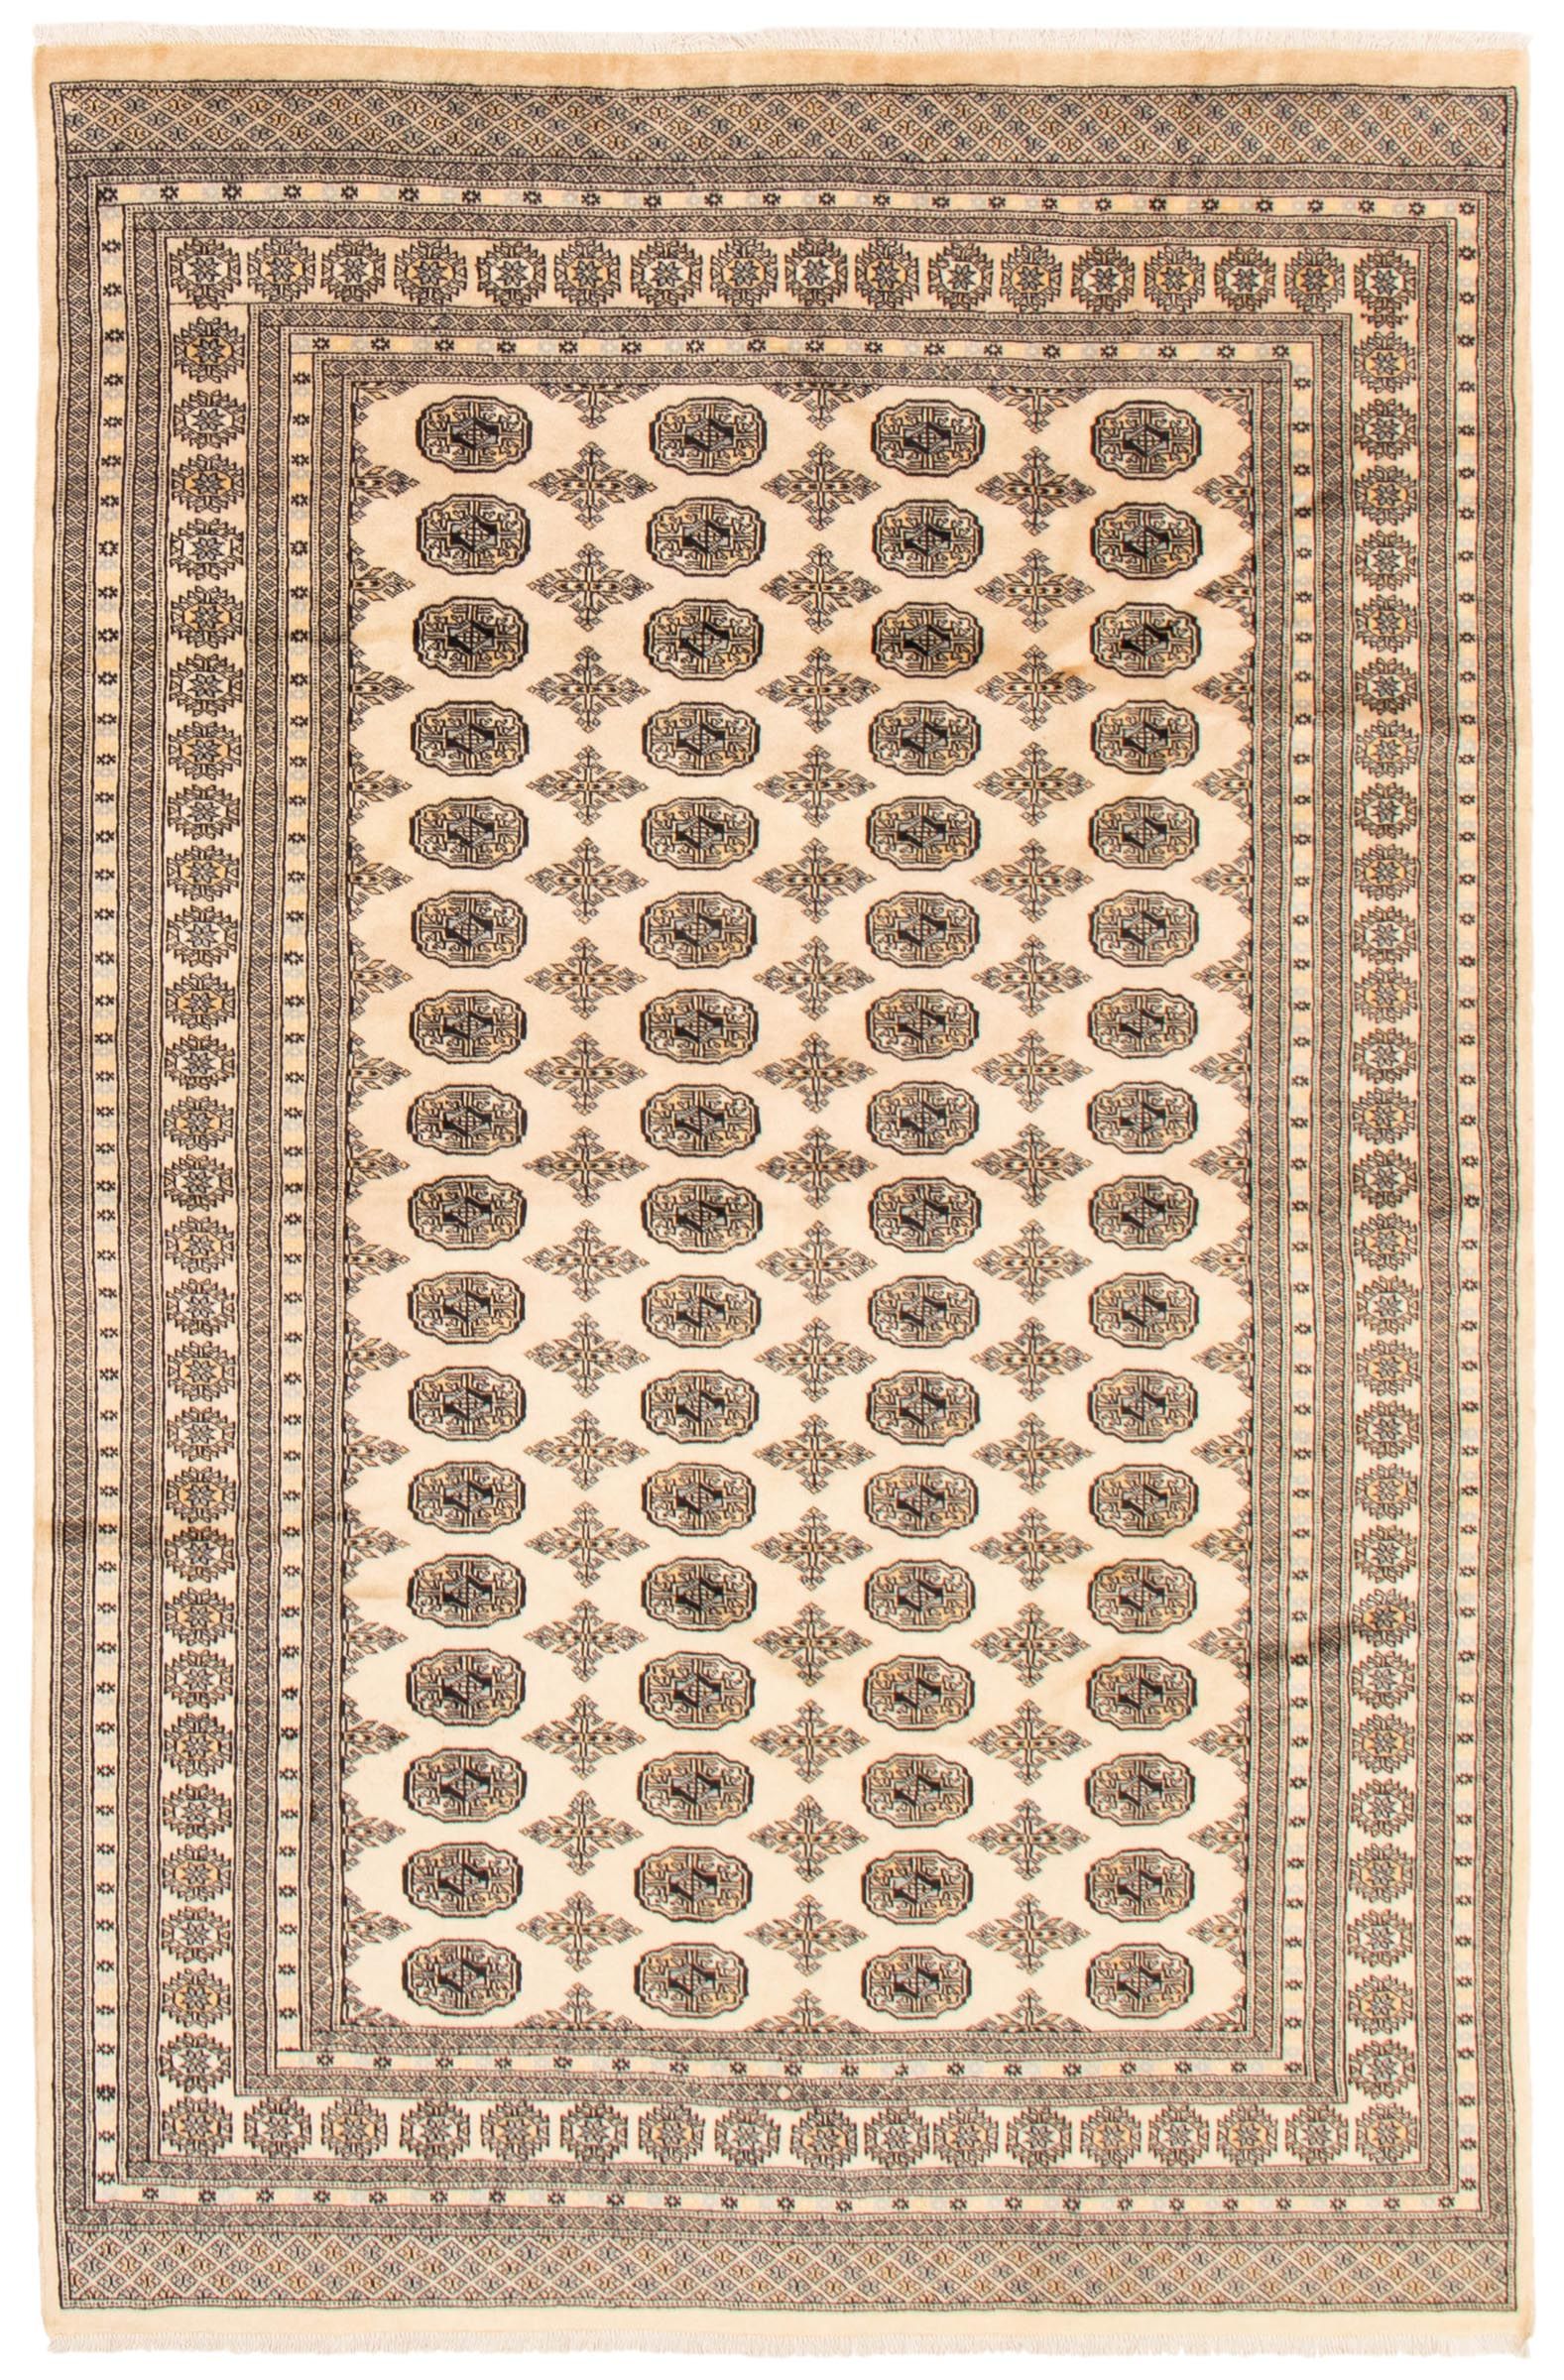 359201 eCarpet Gallery Large Area Rug for Living Room Hand-Knotted Wool Rug Finest Peshawar Bokhara Bordered Ivory Rug 6'6 x 9'8 Bedroom 